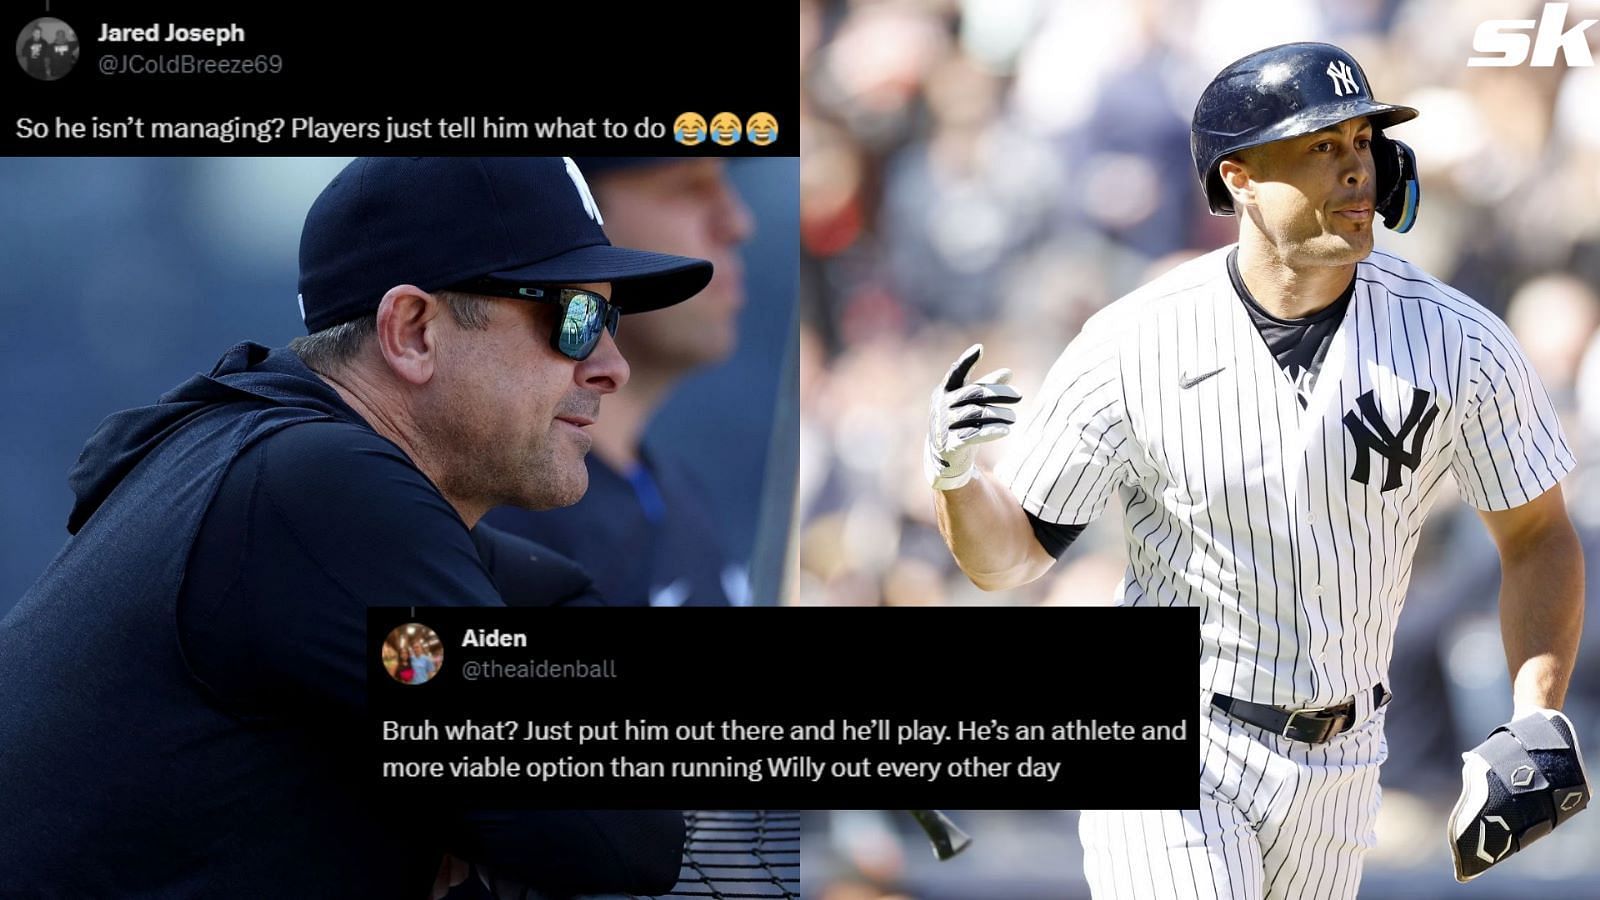 Giancarlo Stanton had a miserable 2019 season with the Yankees